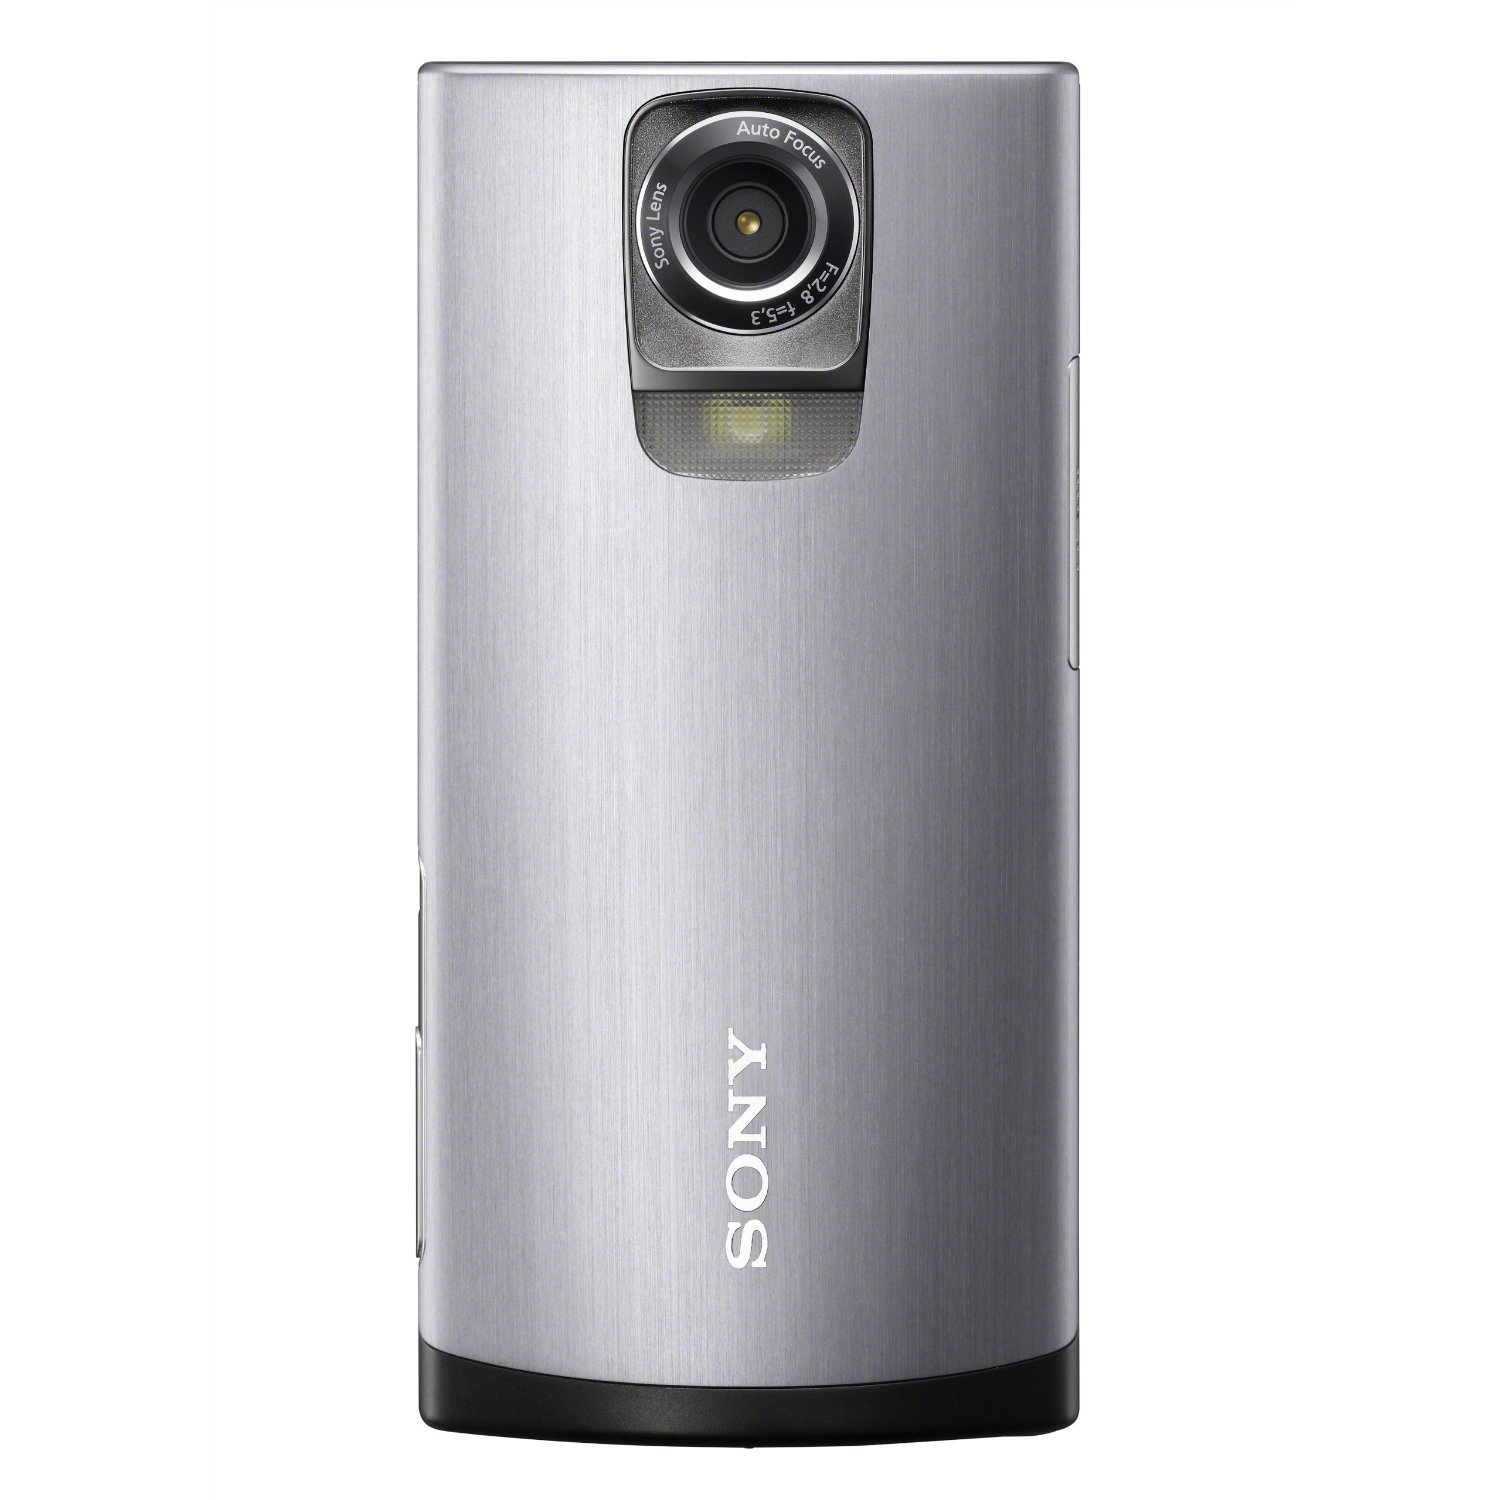 http://thetechjournal.com/wp-content/uploads/images/1201/1327163463-sony-bloggie-live-mhsts55-video-camera--6.jpg